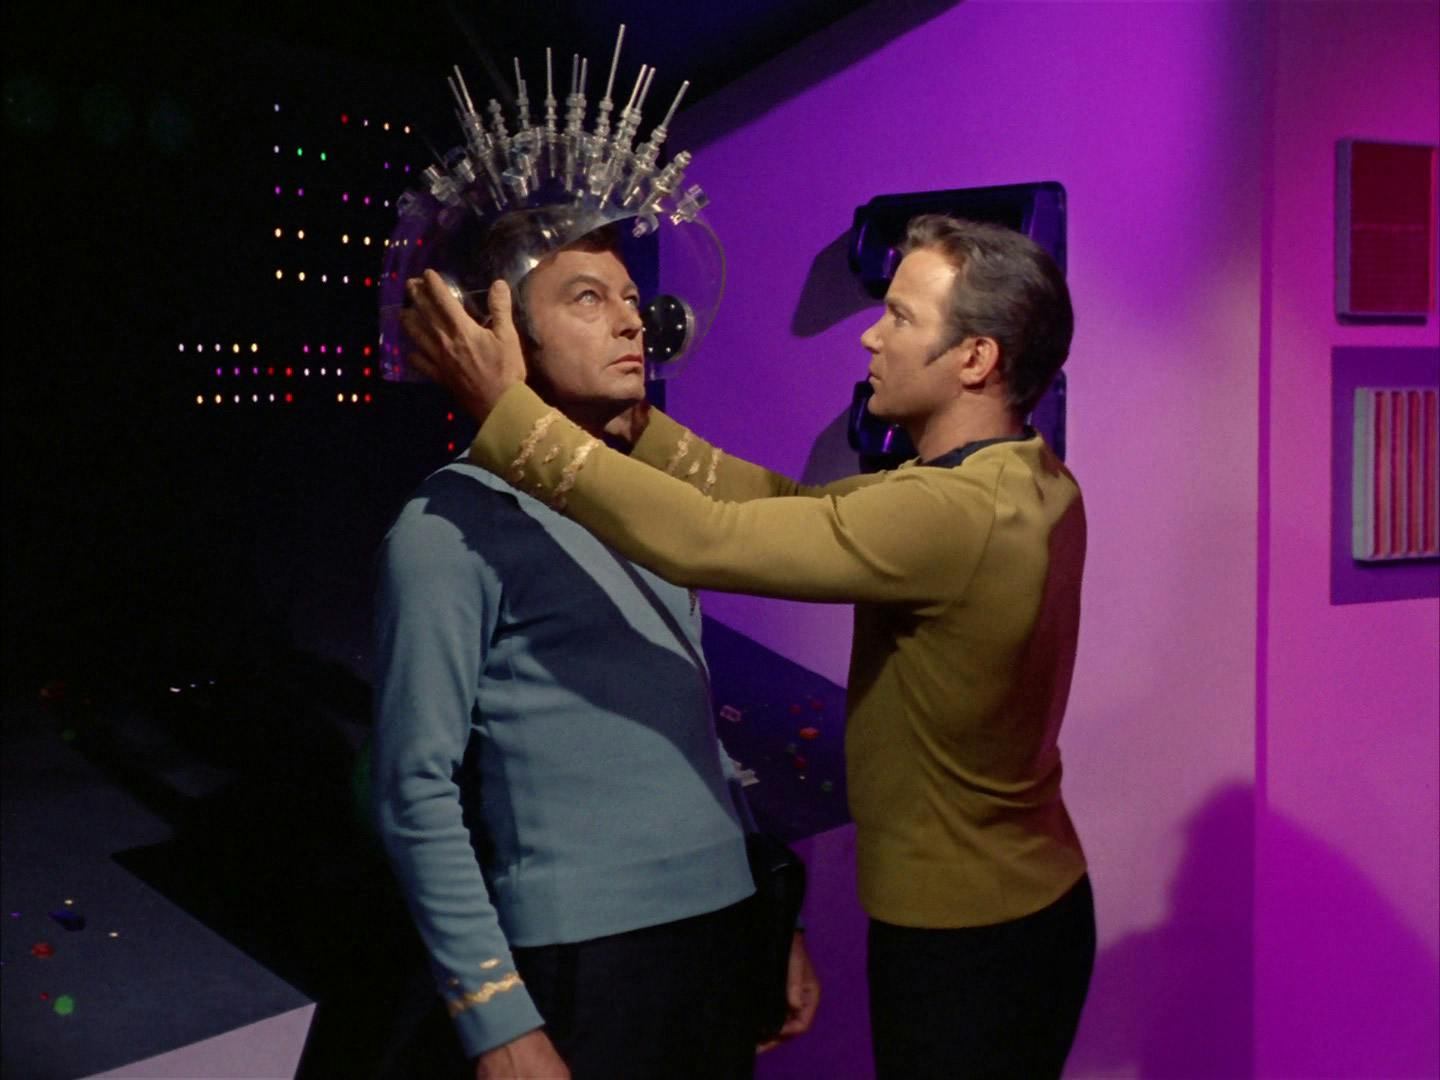 James Kirk places the teacher device on McCoy who endures the pain of the Teacher's lessons in 'Spock's Brain'